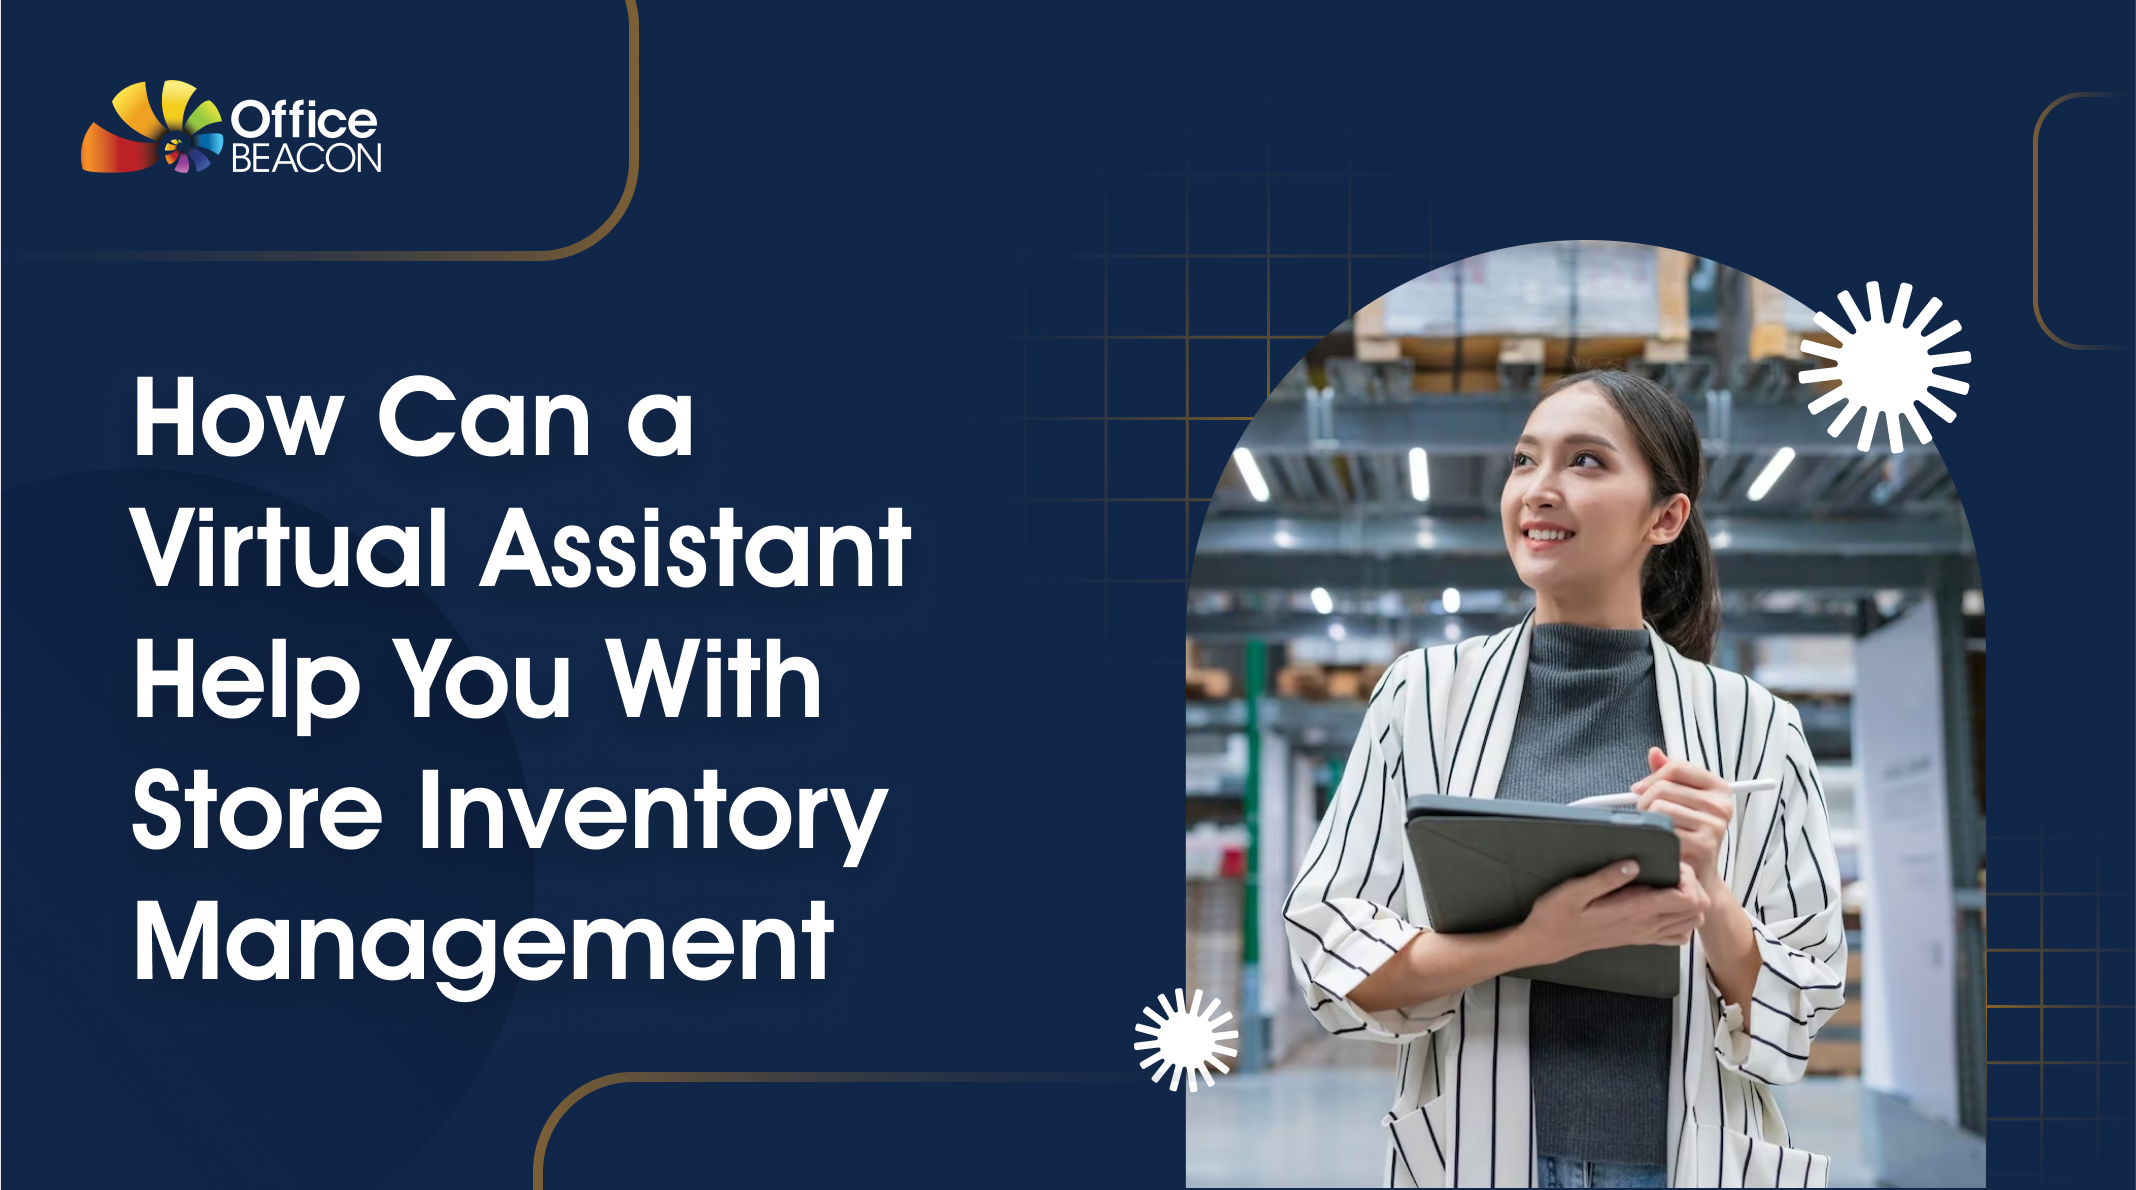 How Can a Virtual Assistant Help You With Store Inventory Management?